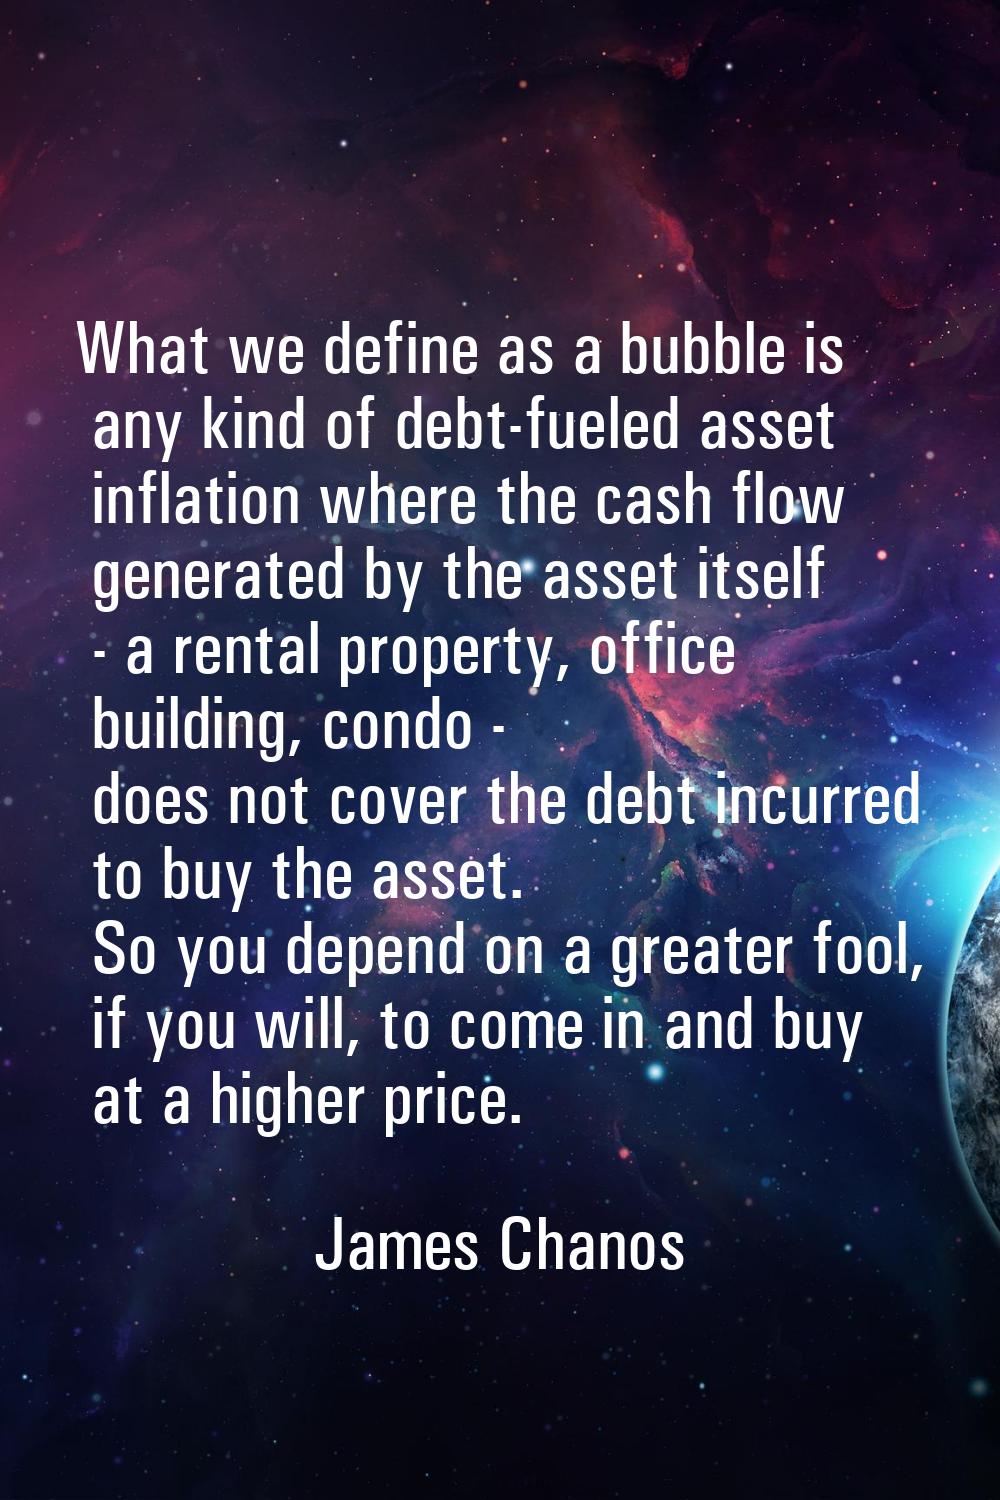 What we define as a bubble is any kind of debt-fueled asset inflation where the cash flow generated